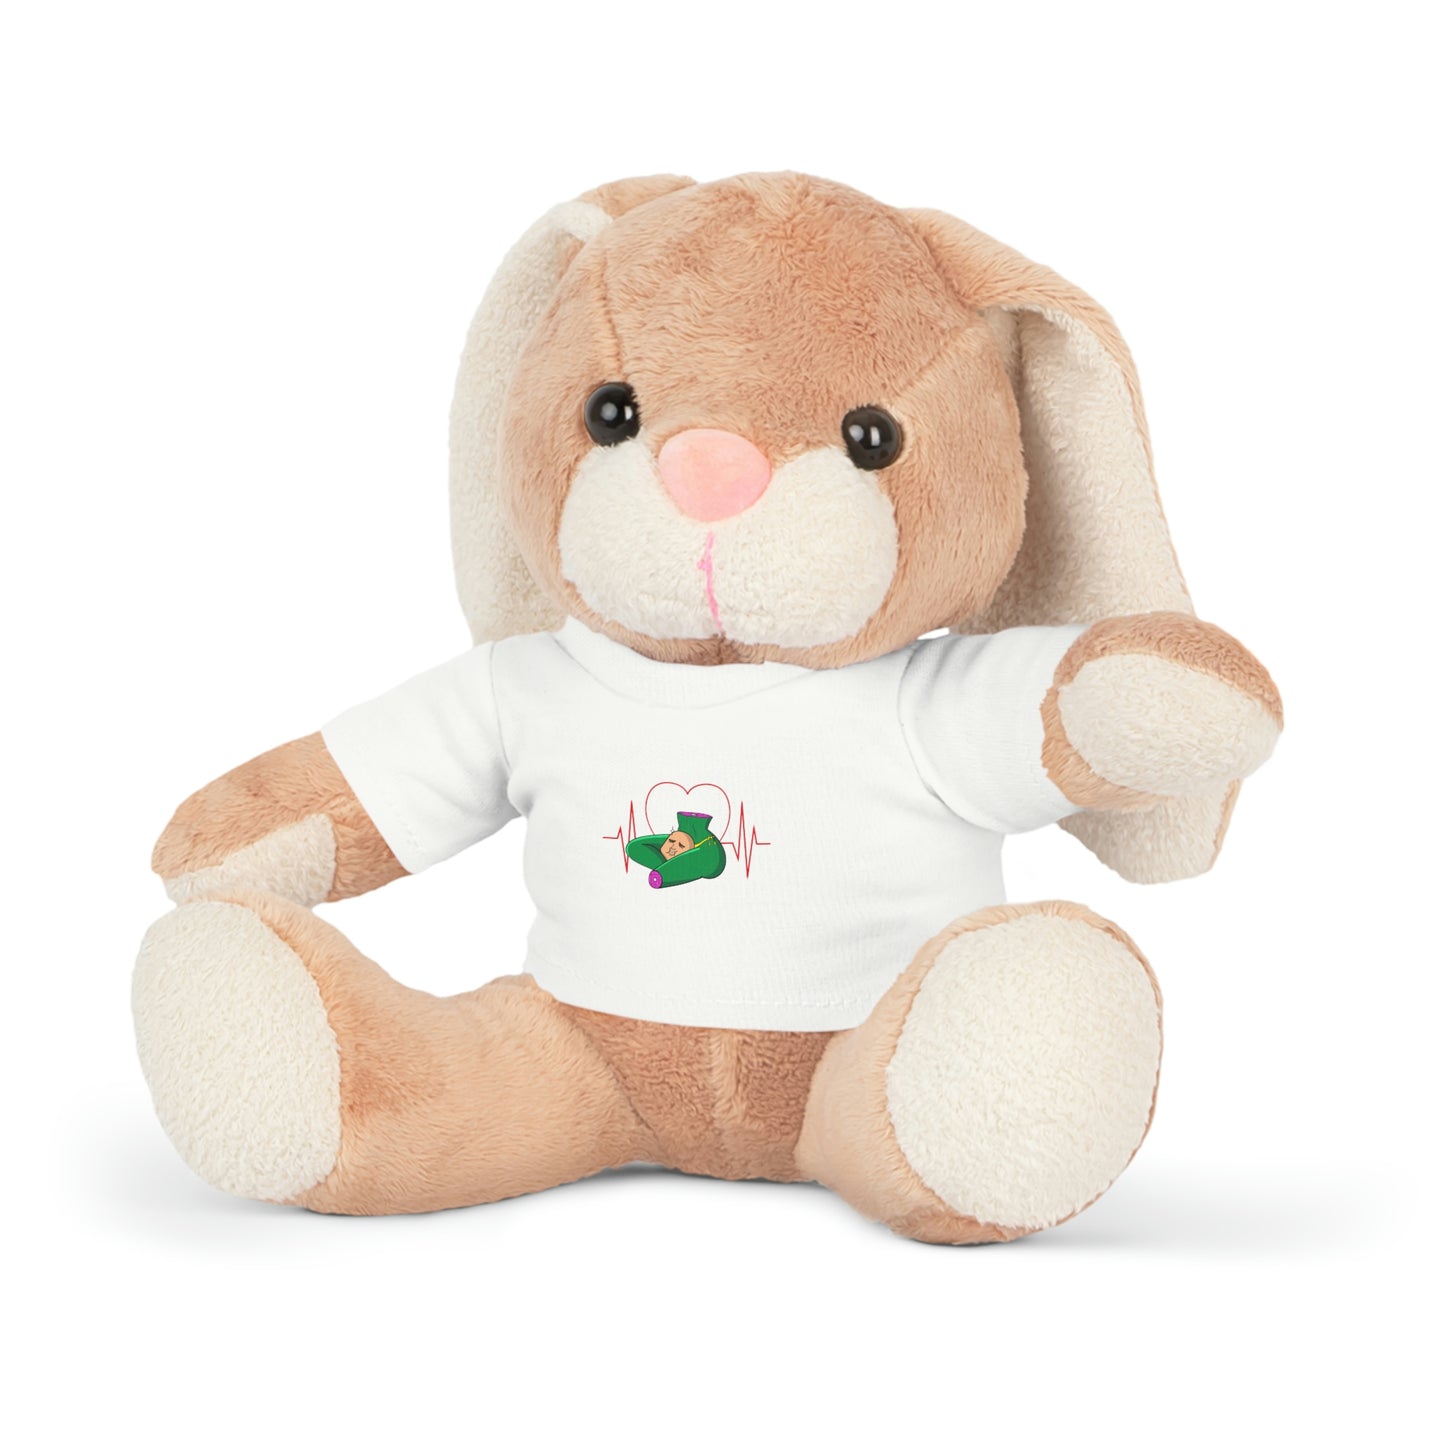 Plush Toy with Anime T-Shirt